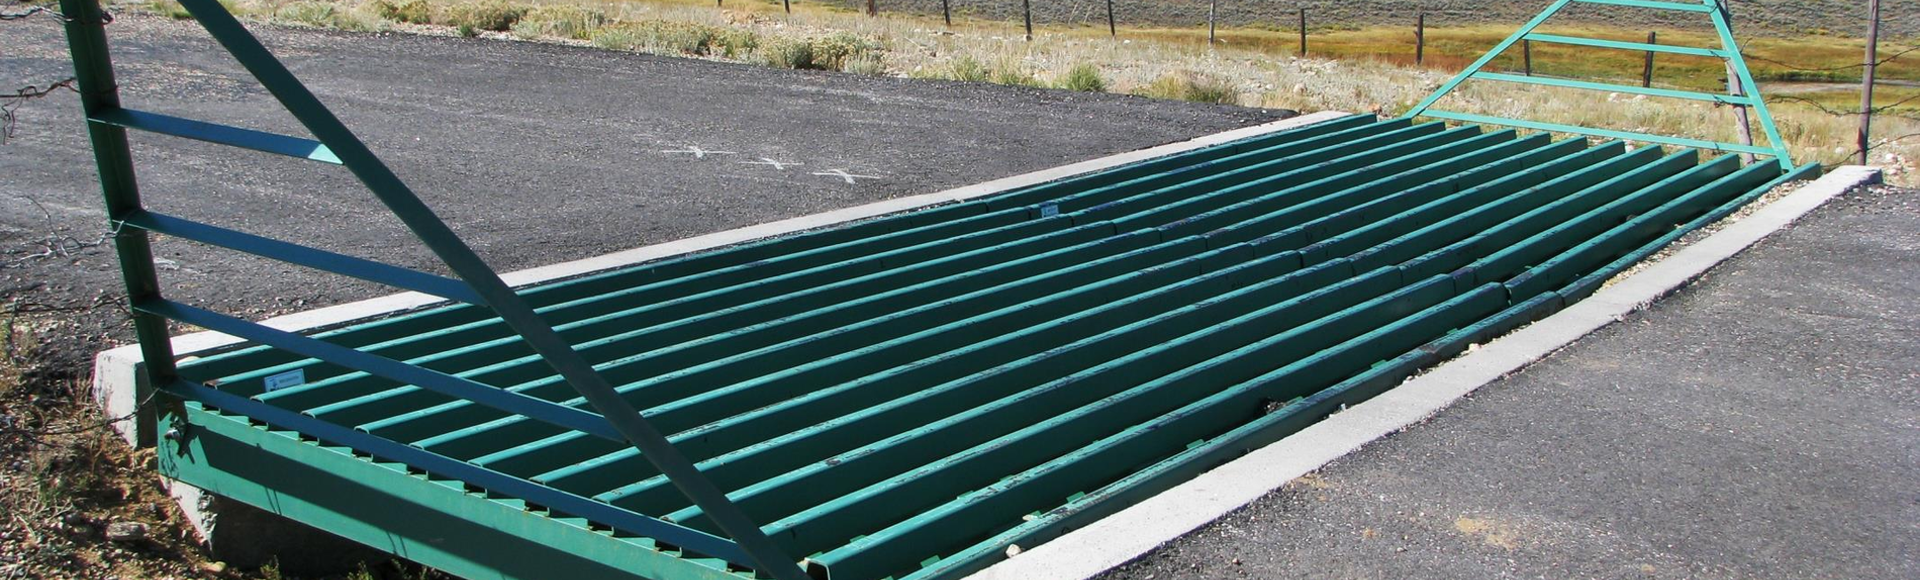 Big R Cattle Guards